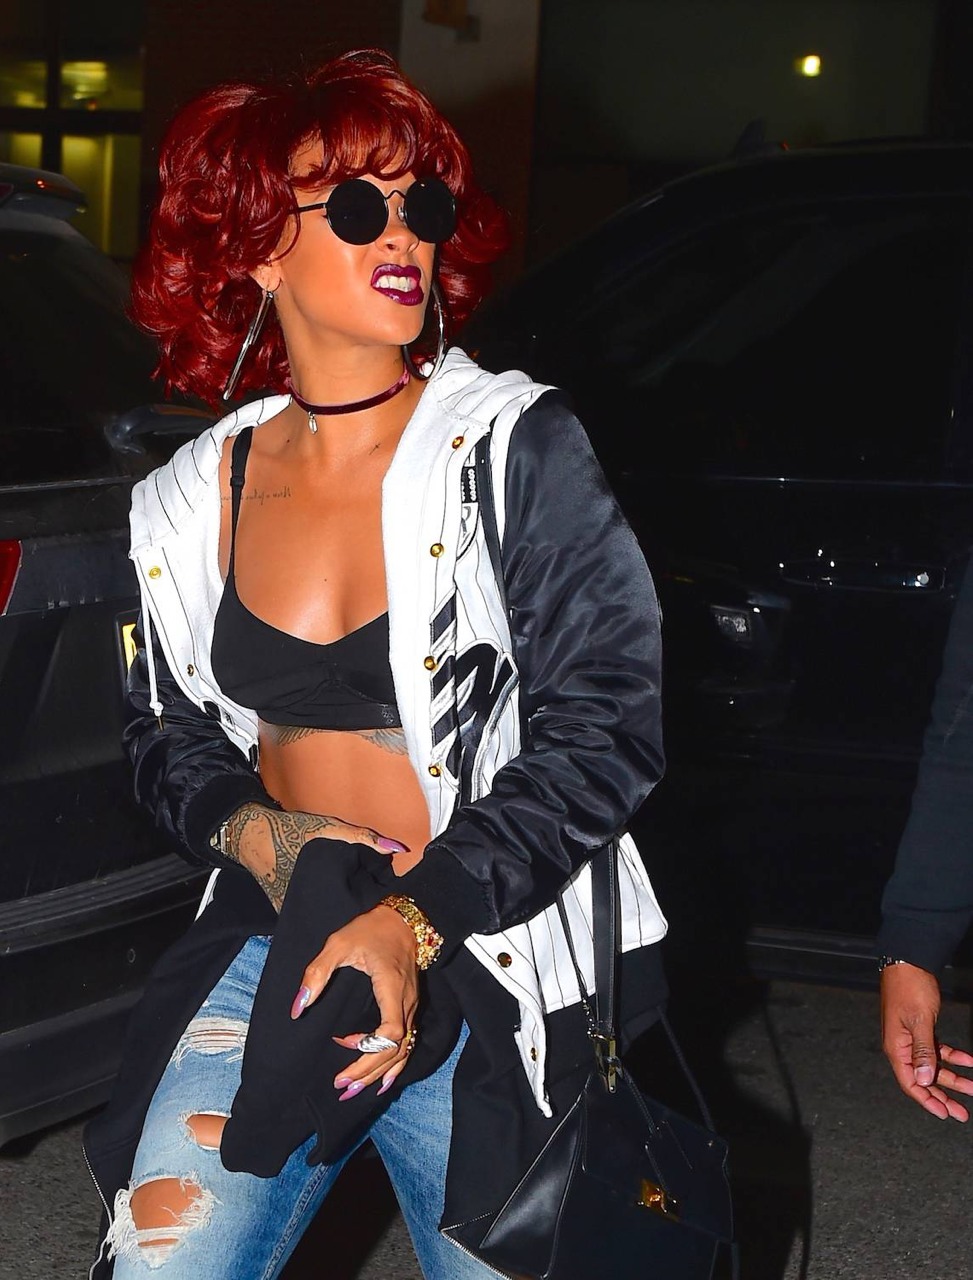 Hot Or Hmm Rihannas New Curly Red Hairstyle Fashion Bomb Daily Style Magazine Celebrity 7025